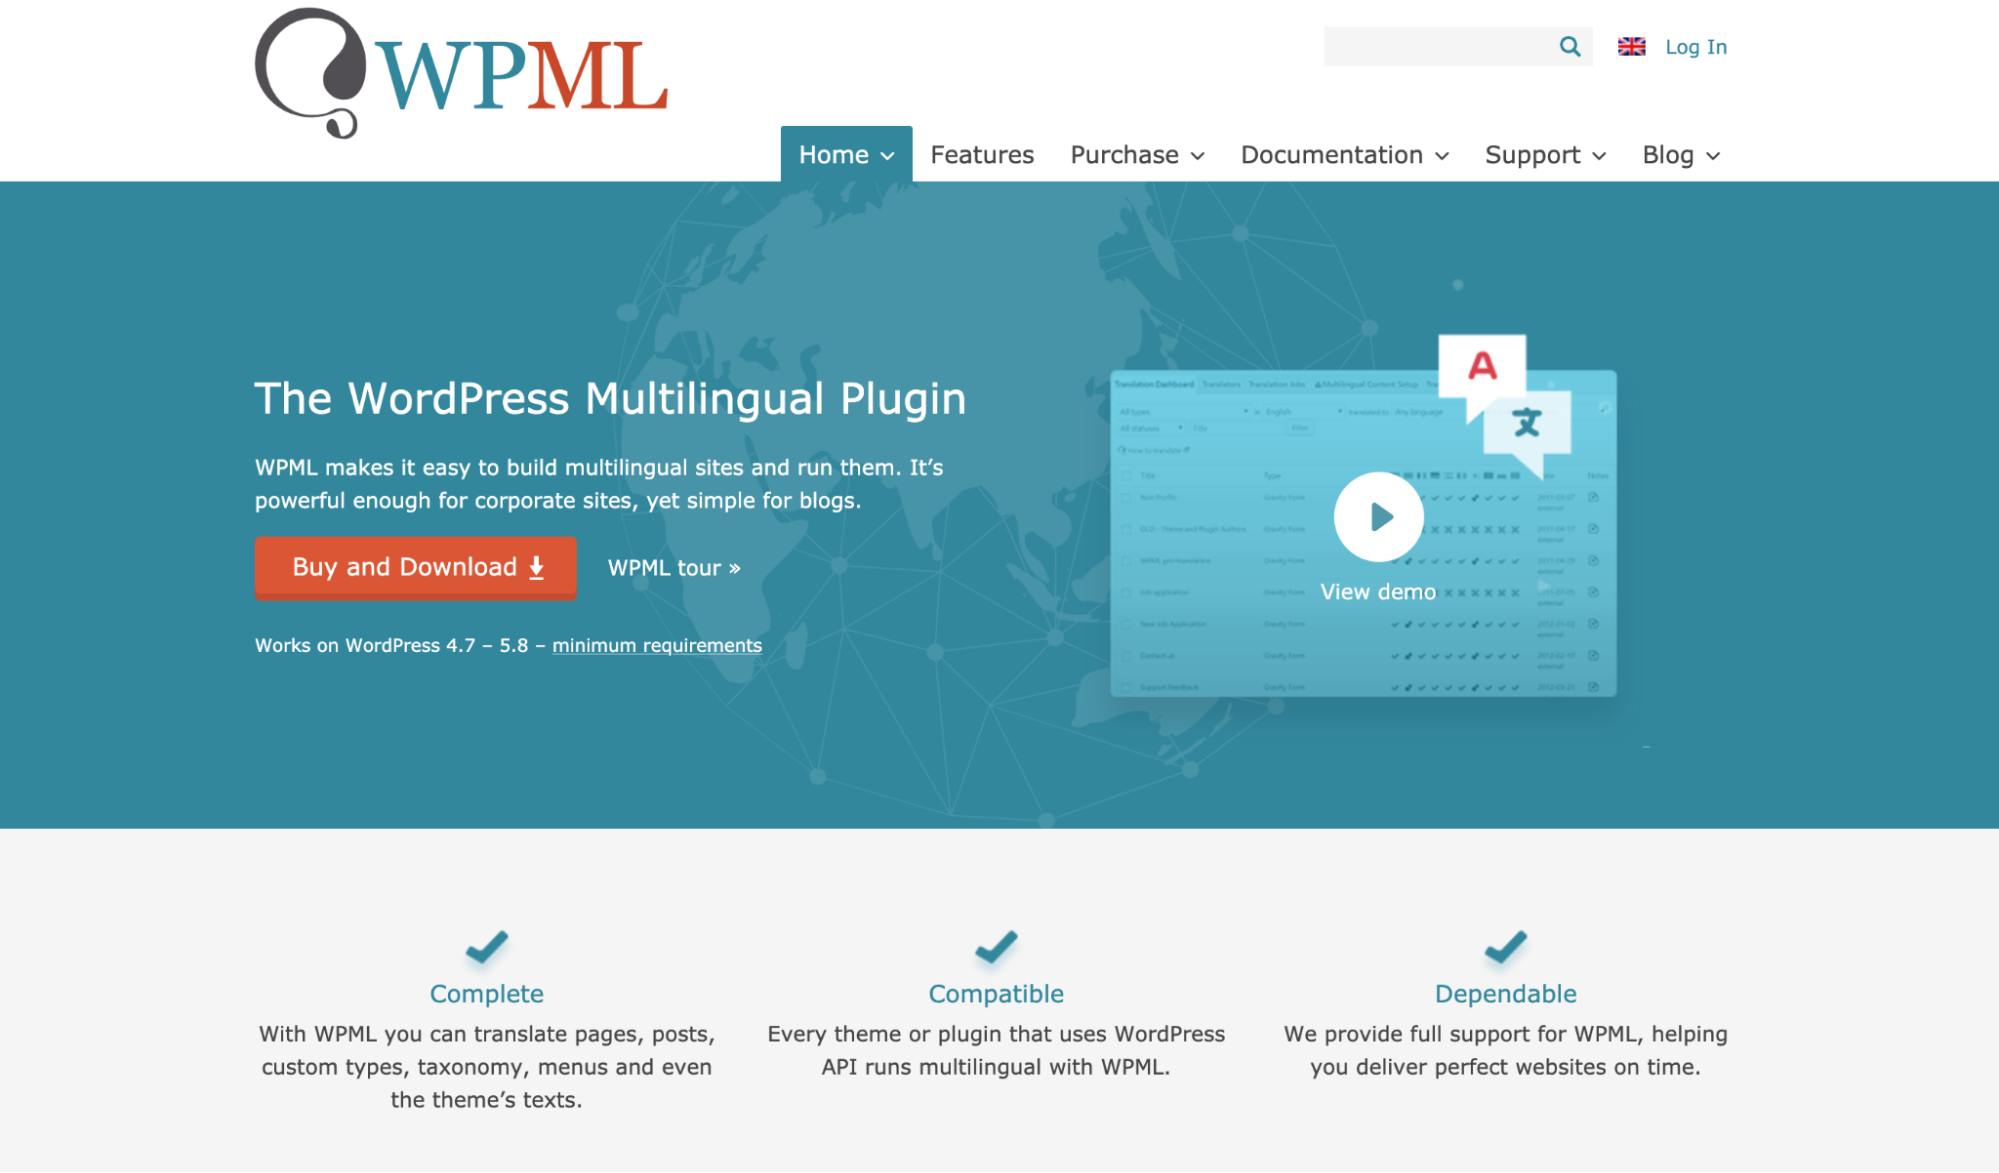 WPML home page